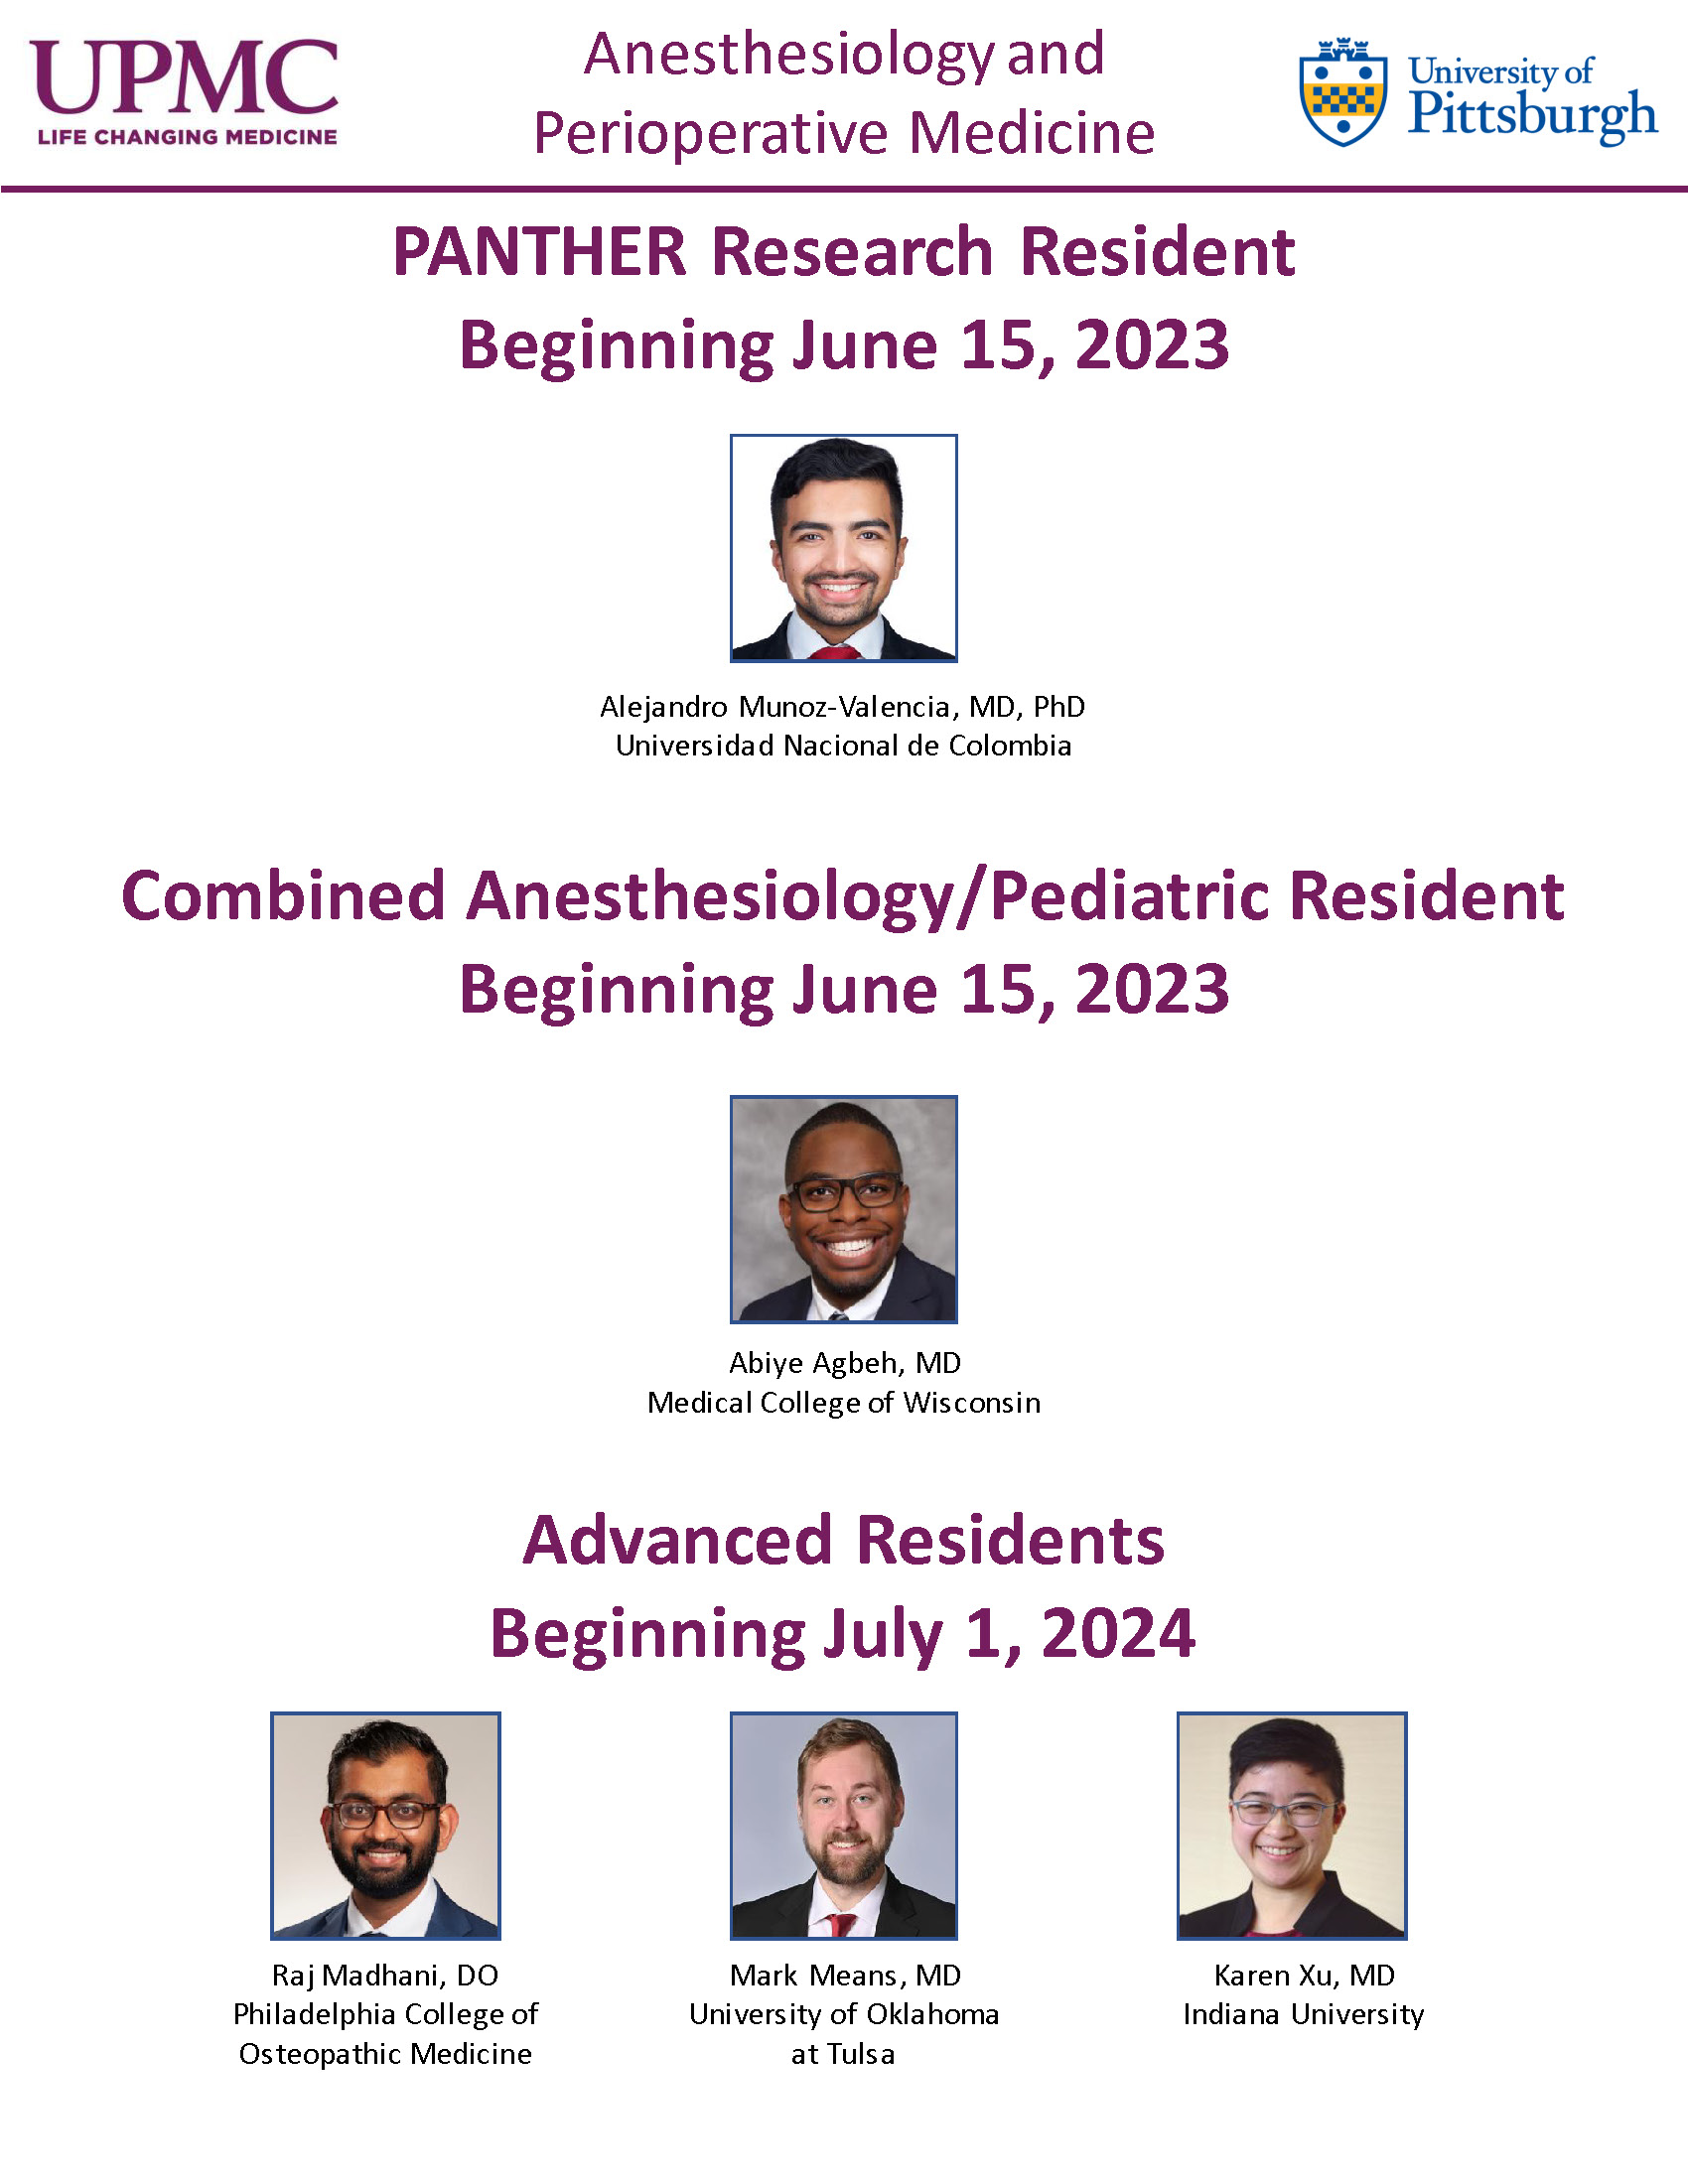 "Headshots of the PANTHER Research, advanced, and combined anesthesiology pediatric residents"